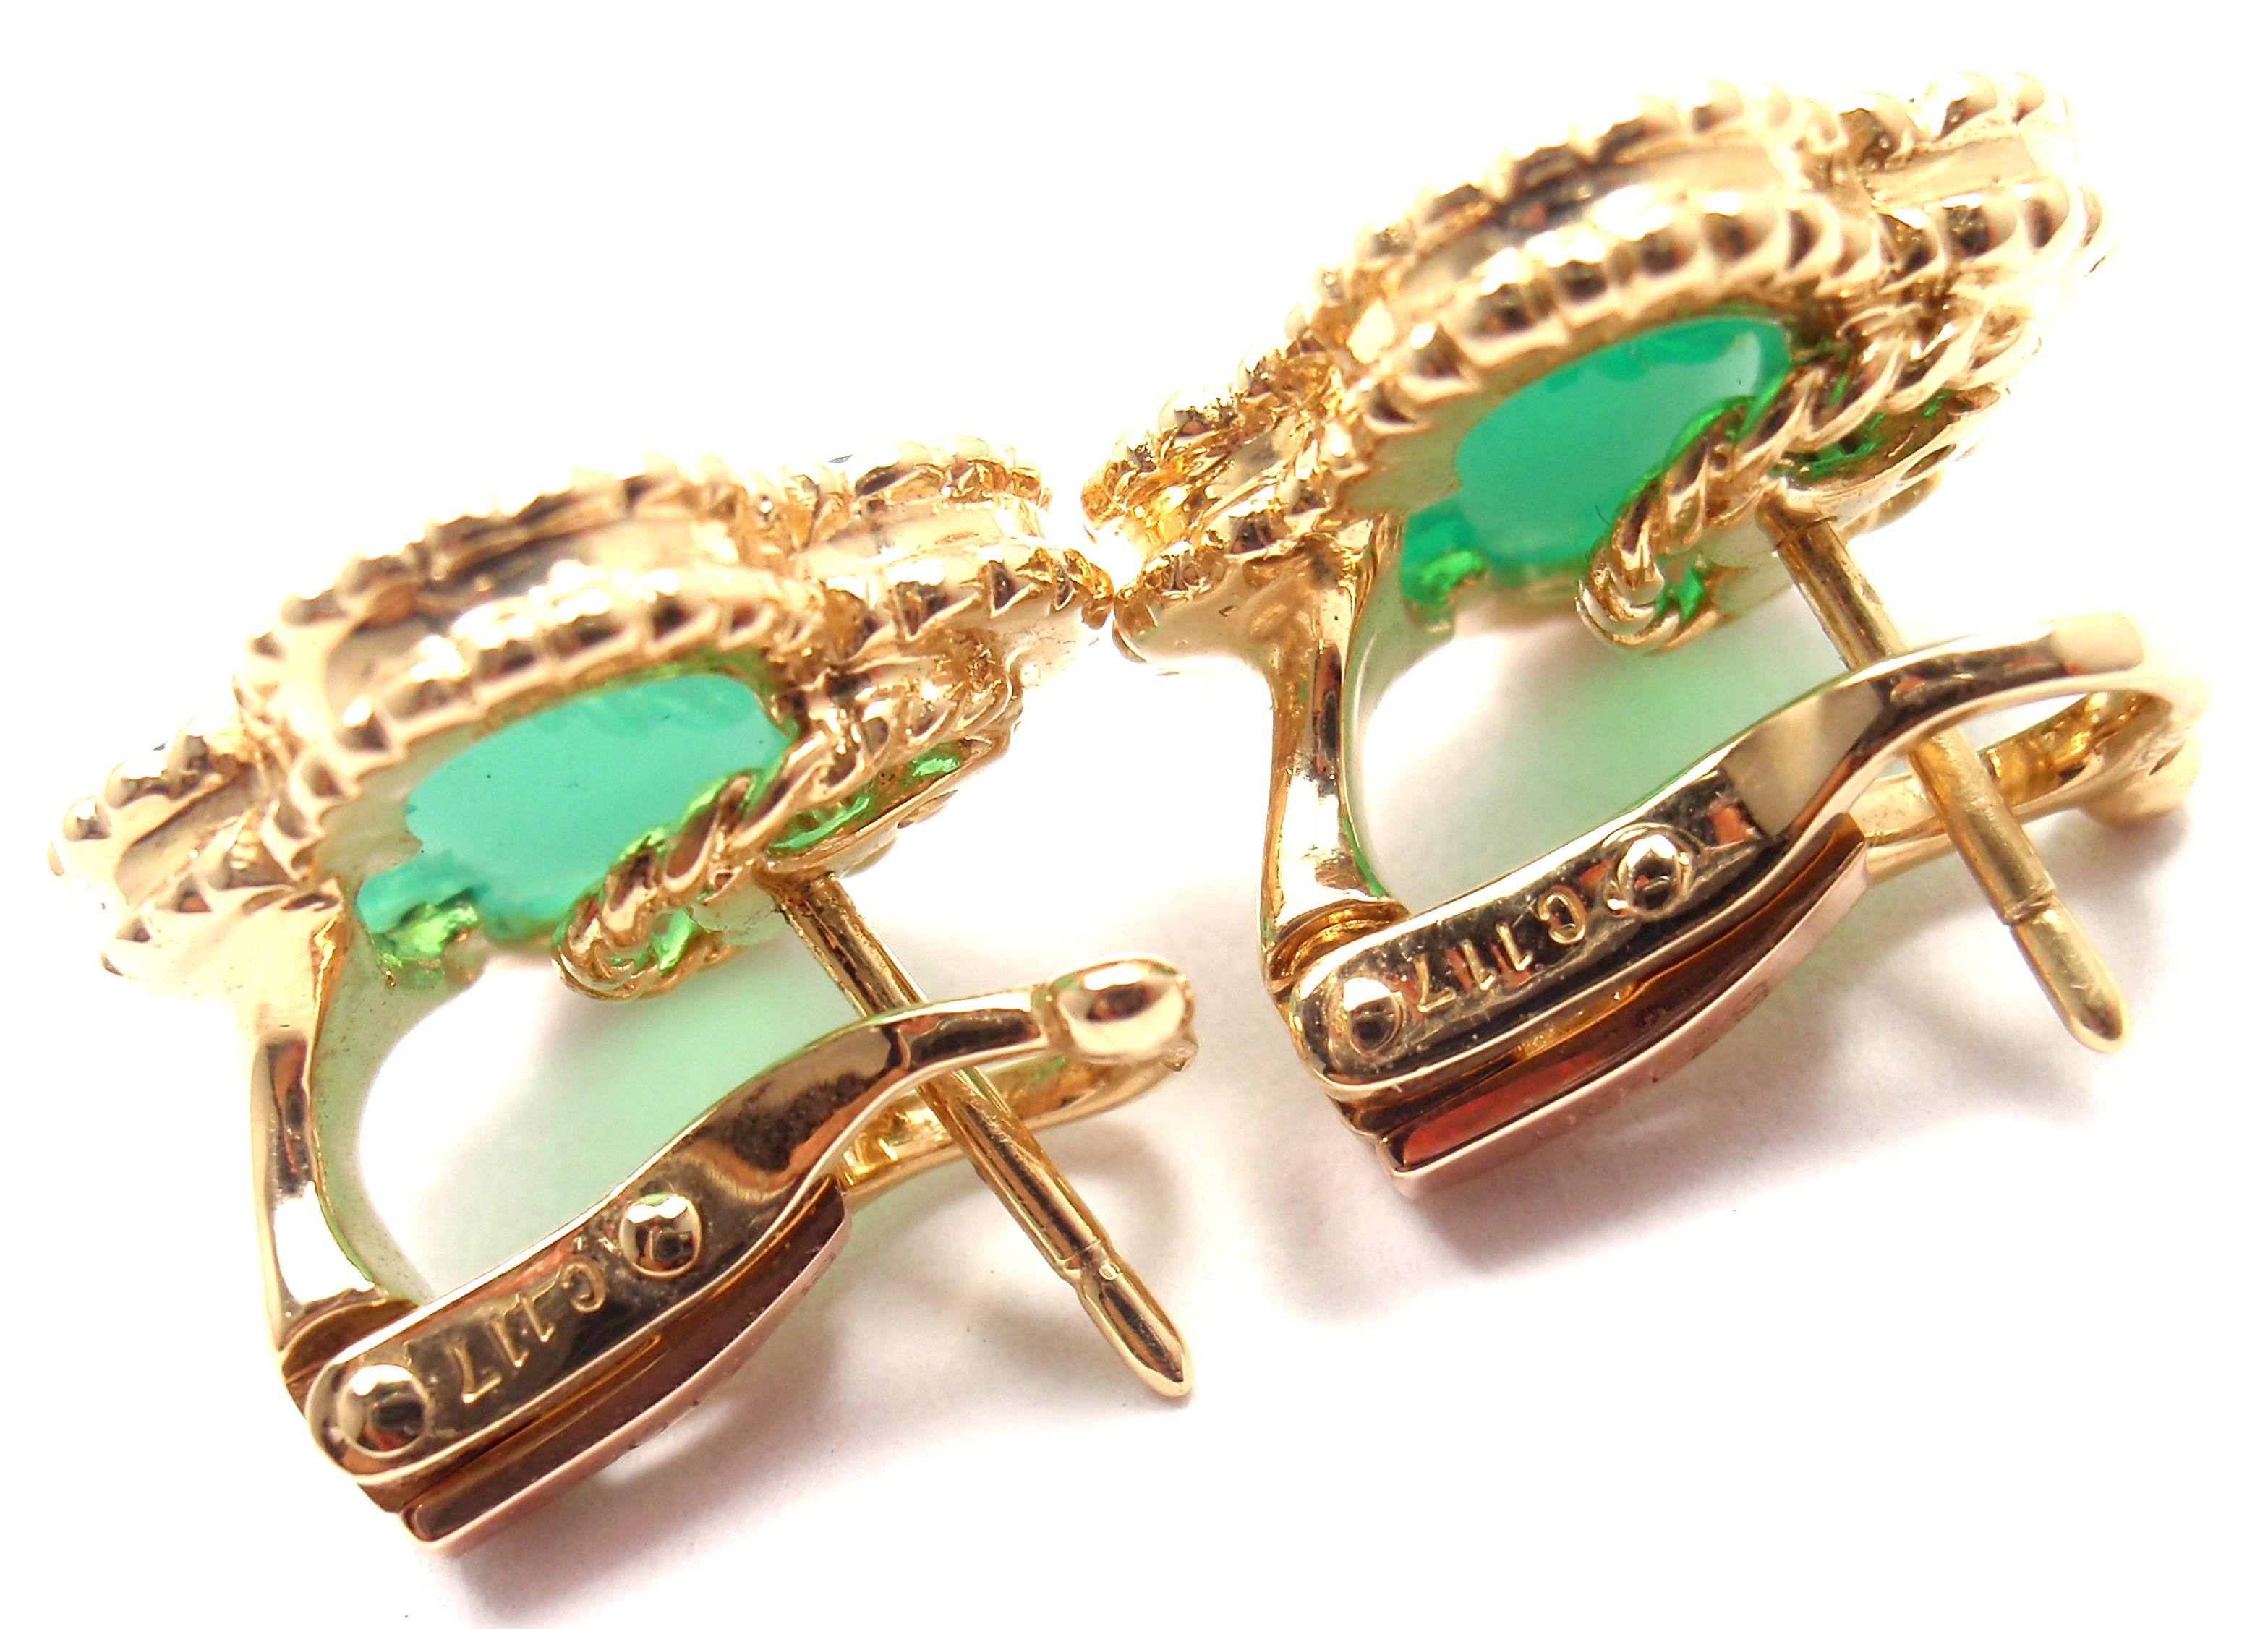 18k Yellow Gold Vintage Alhambra Green Chalcedony Earrings by Van Cleef & Arpels. 
With 2 green chalcedony stones: 15mm each.
These earrings are for pierced ears.

Details: 
Measurements: 15mm x 15mm
Alhambra: 14mm
Weight: 7.4 grams
Stamped